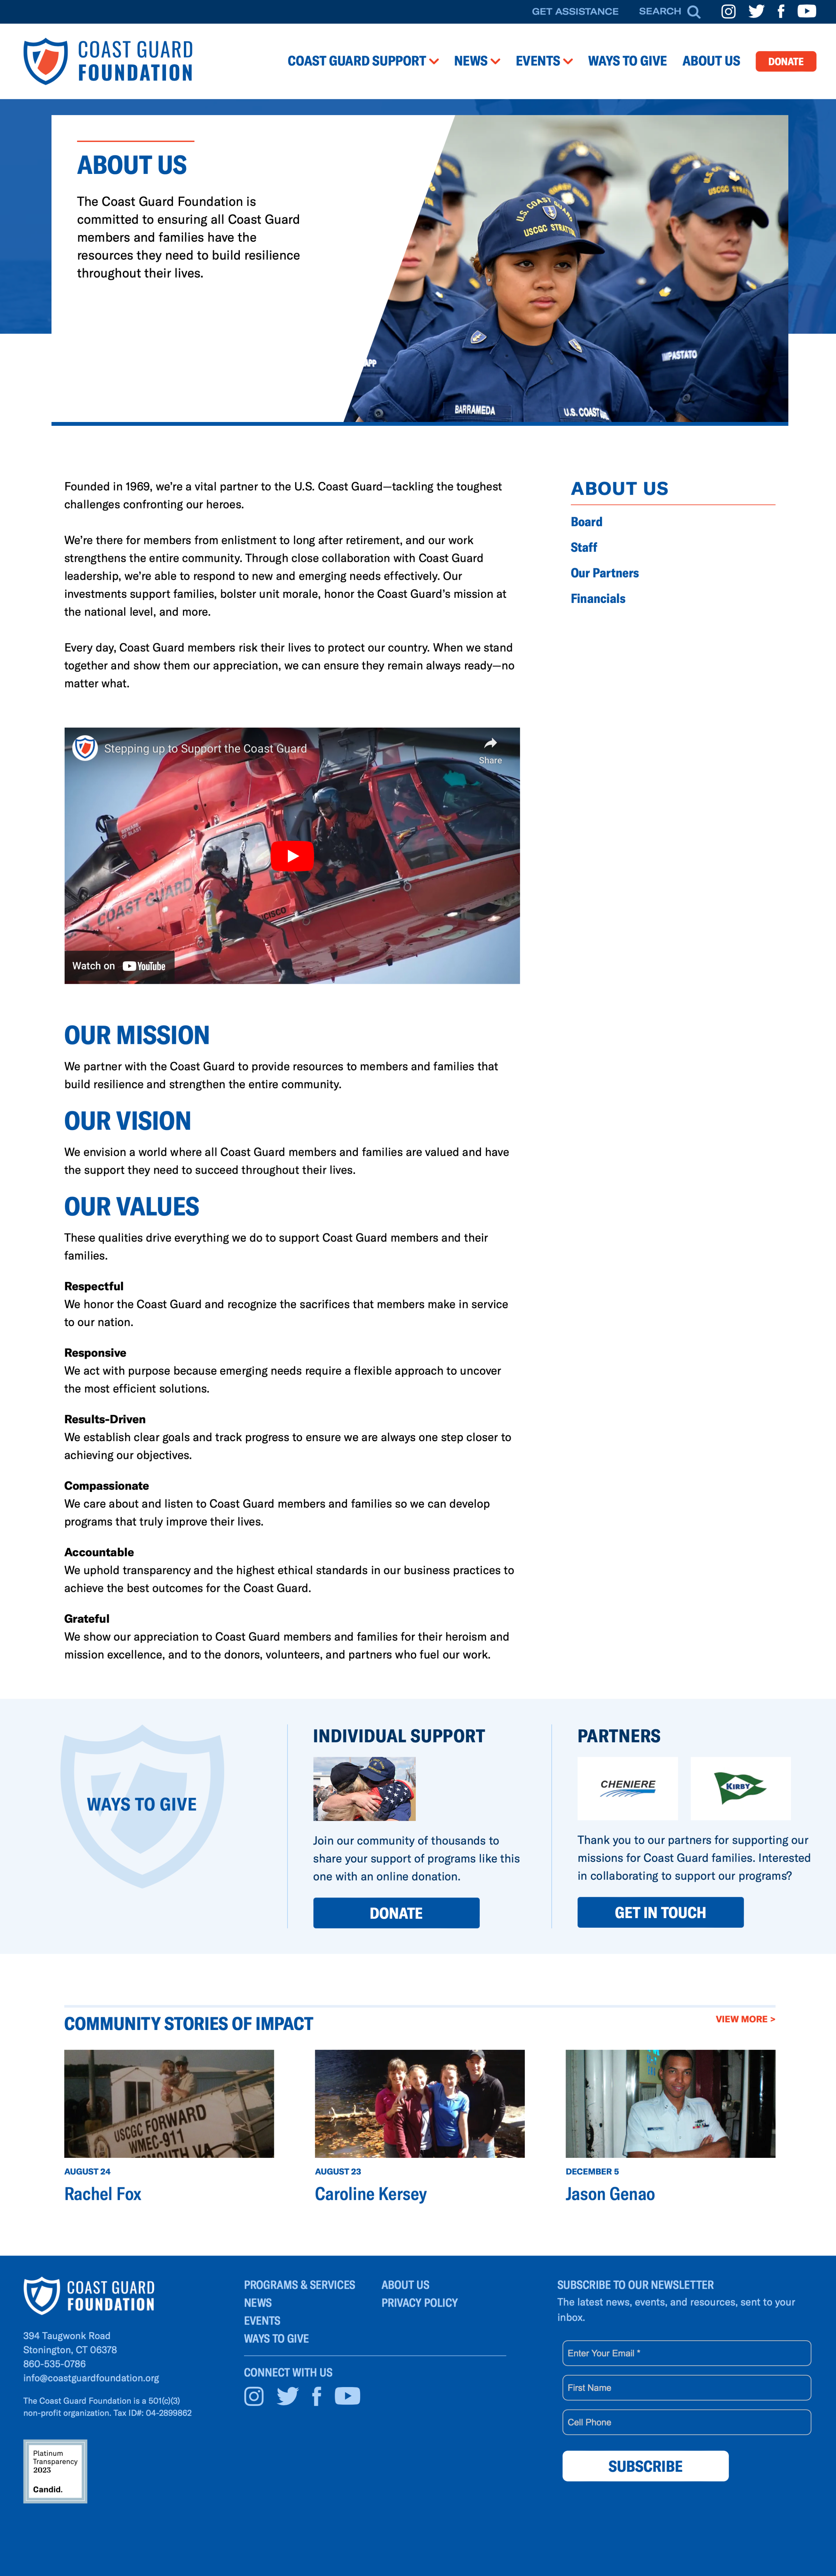 Coast Guard Foundation about page. Has text and video towards top of page that shares the mission and vision of the organization. Has a ways to give section that includes opportunities to donate or contact to partner. Finally, has a section with three community stories, each with an image, that showcases impact.